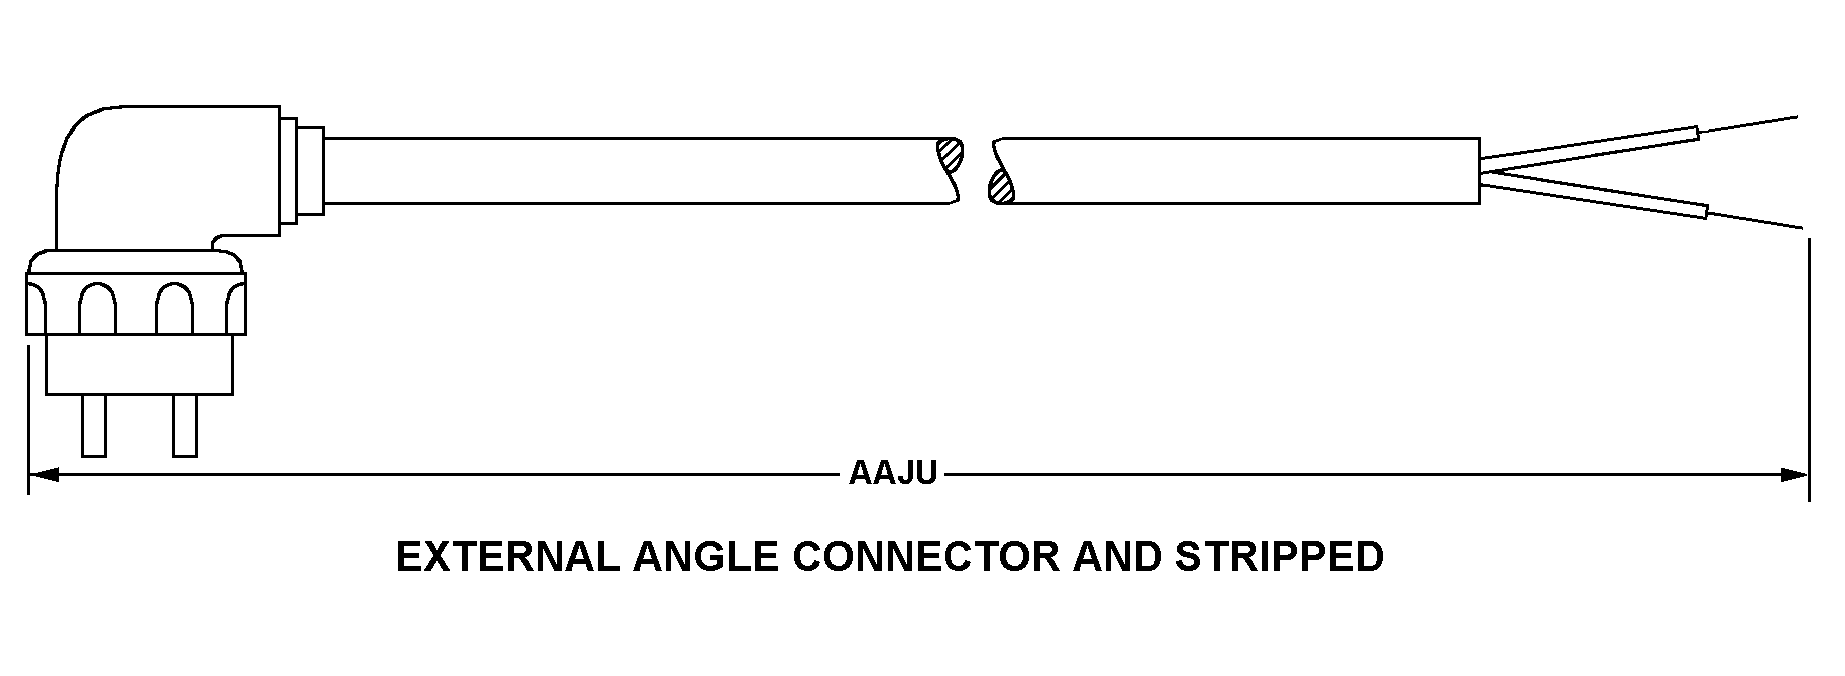 EXTERNAL ANGLE CONNECTOR AND STRIPPED style nsn 6150-01-115-3792